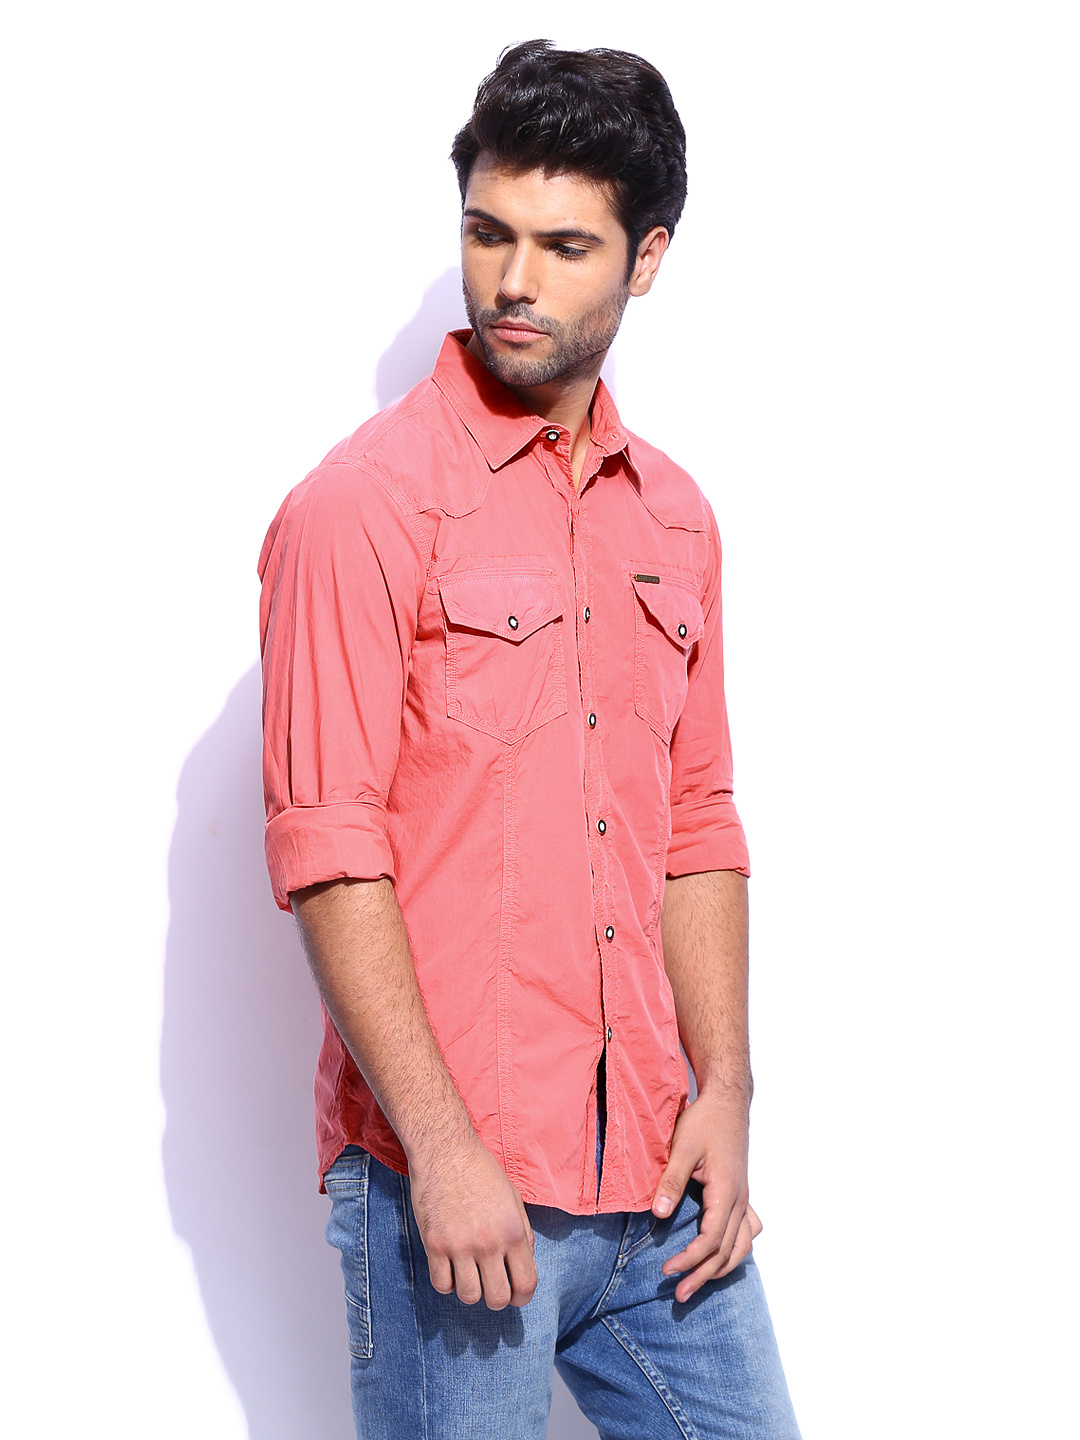 casual pink shirt for men mens pink casual shirts TYPPUDK